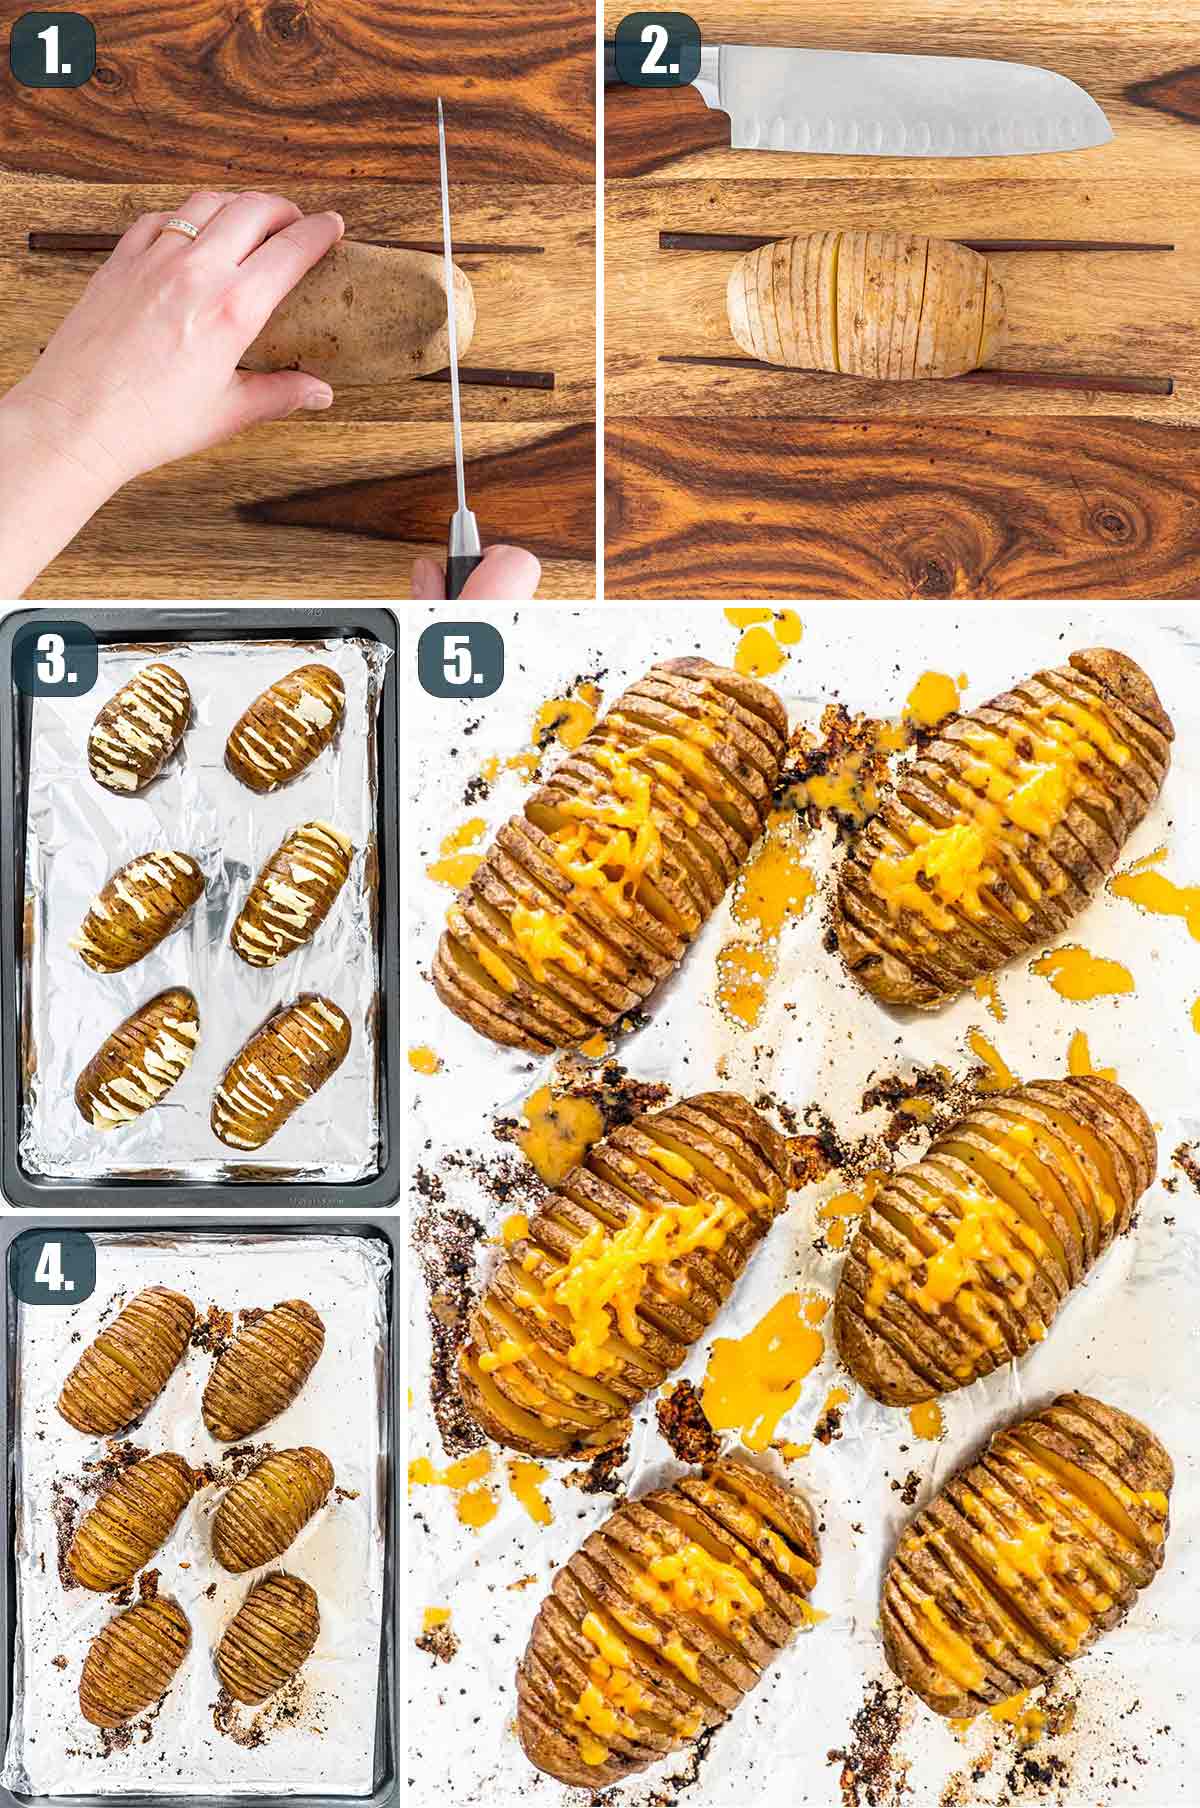 detailed process shots showing how to make hasselback potatoes.